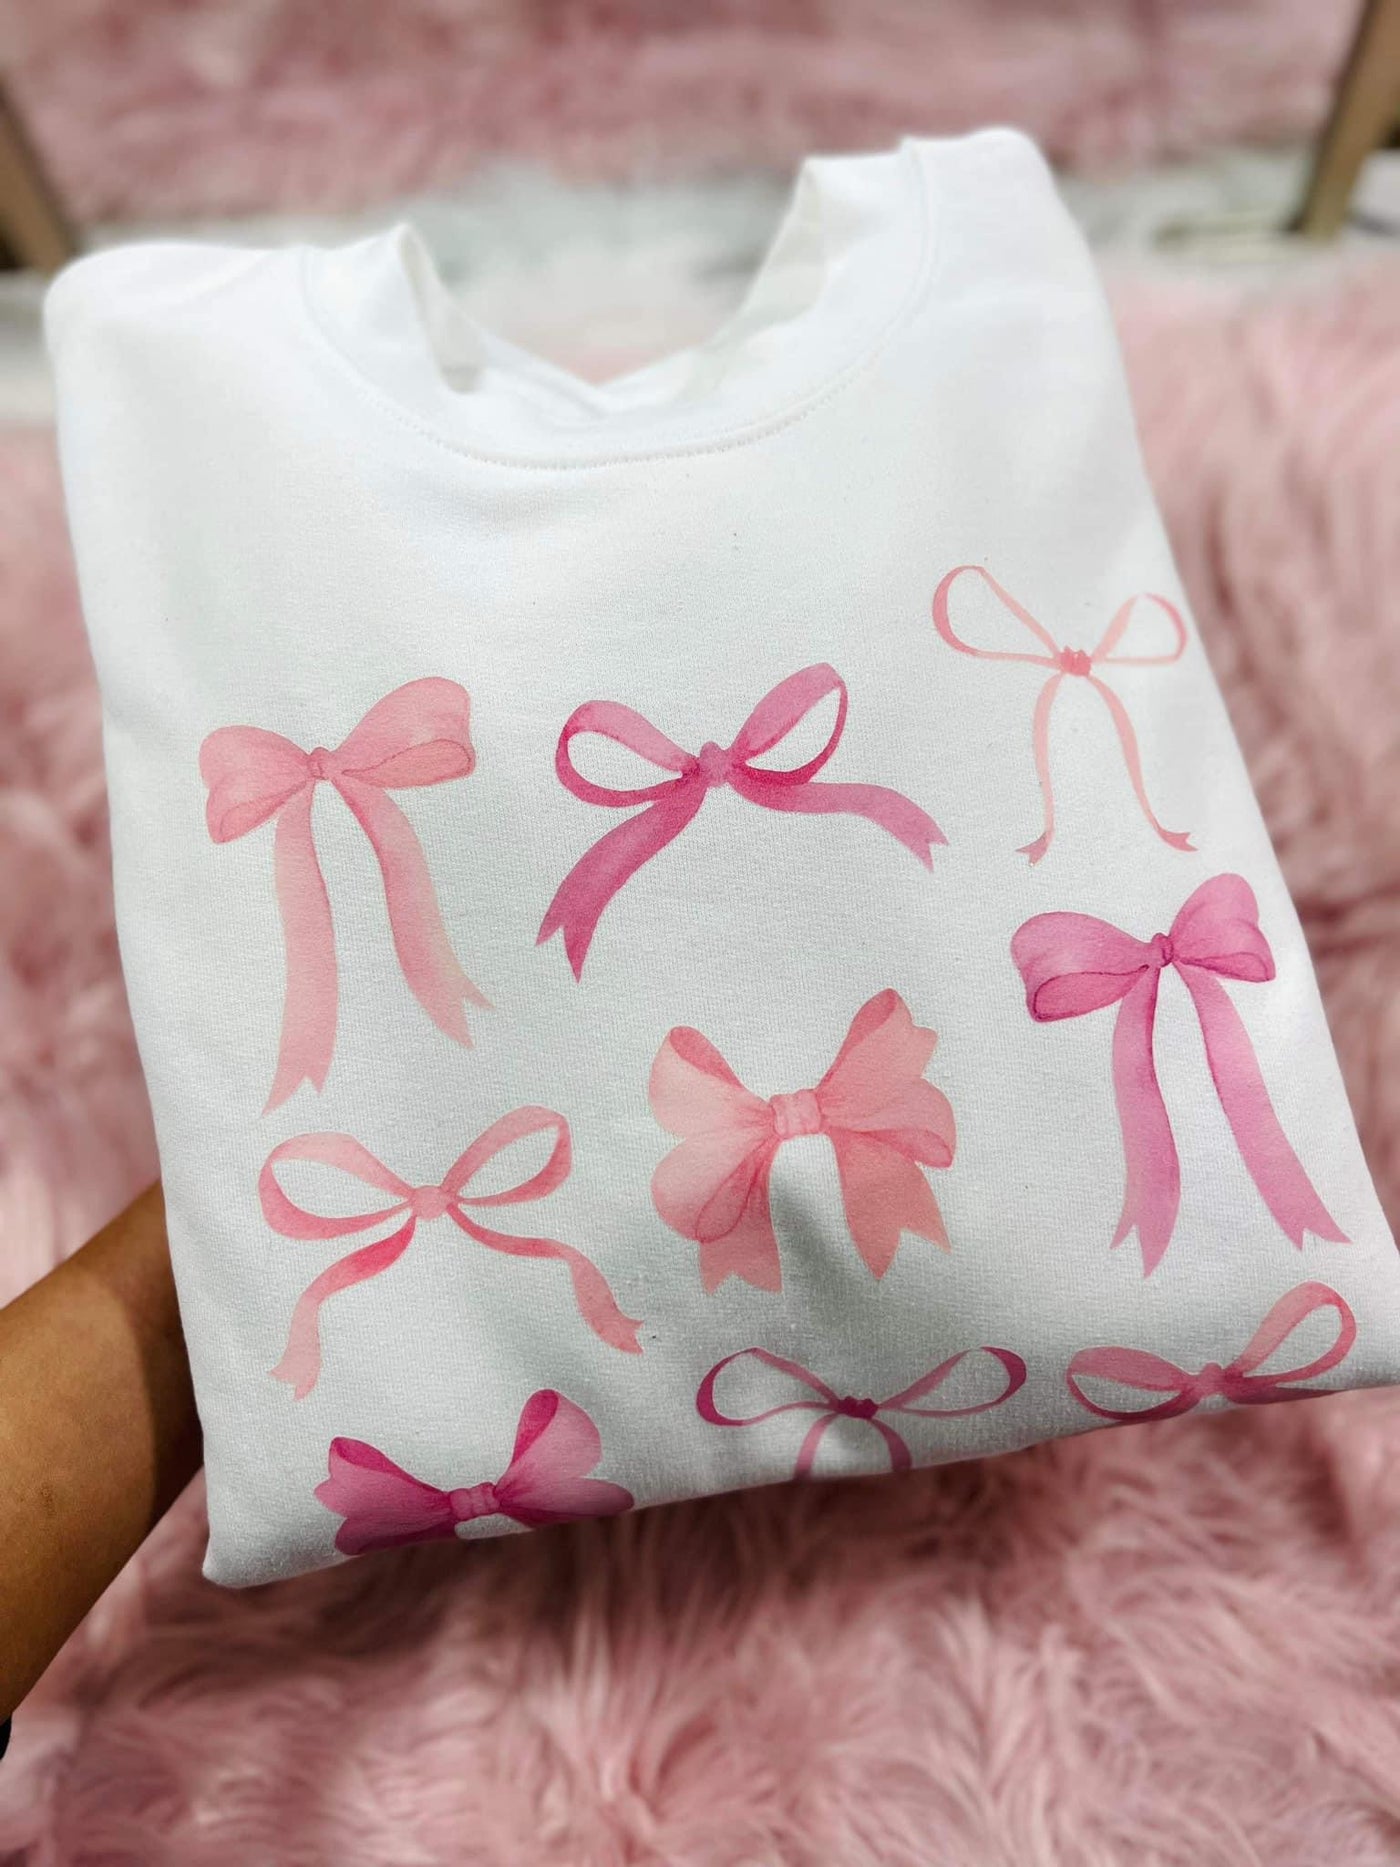 All About the Bows - Pink and White Bow Sweatshirt